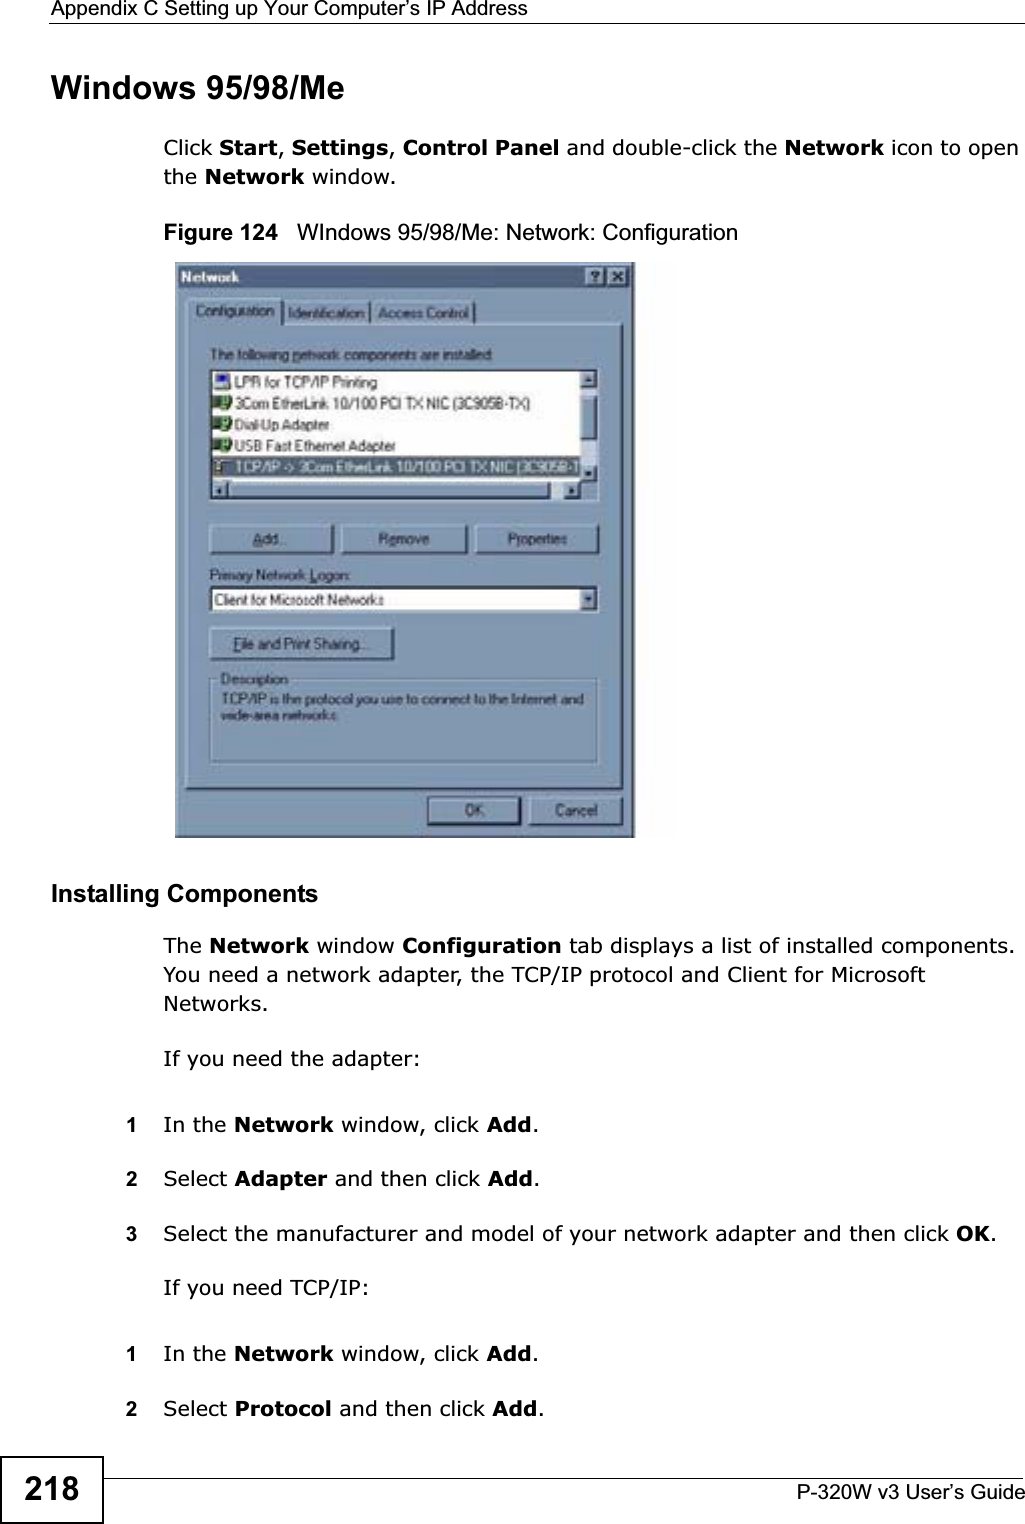 Appendix C Setting up Your Computer’s IP AddressP-320W v3 User’s Guide218Windows 95/98/MeClick Start,Settings,Control Panel and double-click the Network icon to open the Network window.Figure 124   WIndows 95/98/Me: Network: ConfigurationInstalling ComponentsThe Network window Configuration tab displays a list of installed components. You need a network adapter, the TCP/IP protocol and Client for Microsoft Networks.If you need the adapter:1In the Network window, click Add.2Select Adapter and then click Add.3Select the manufacturer and model of your network adapter and then click OK.If you need TCP/IP:1In the Network window, click Add.2Select Protocol and then click Add.